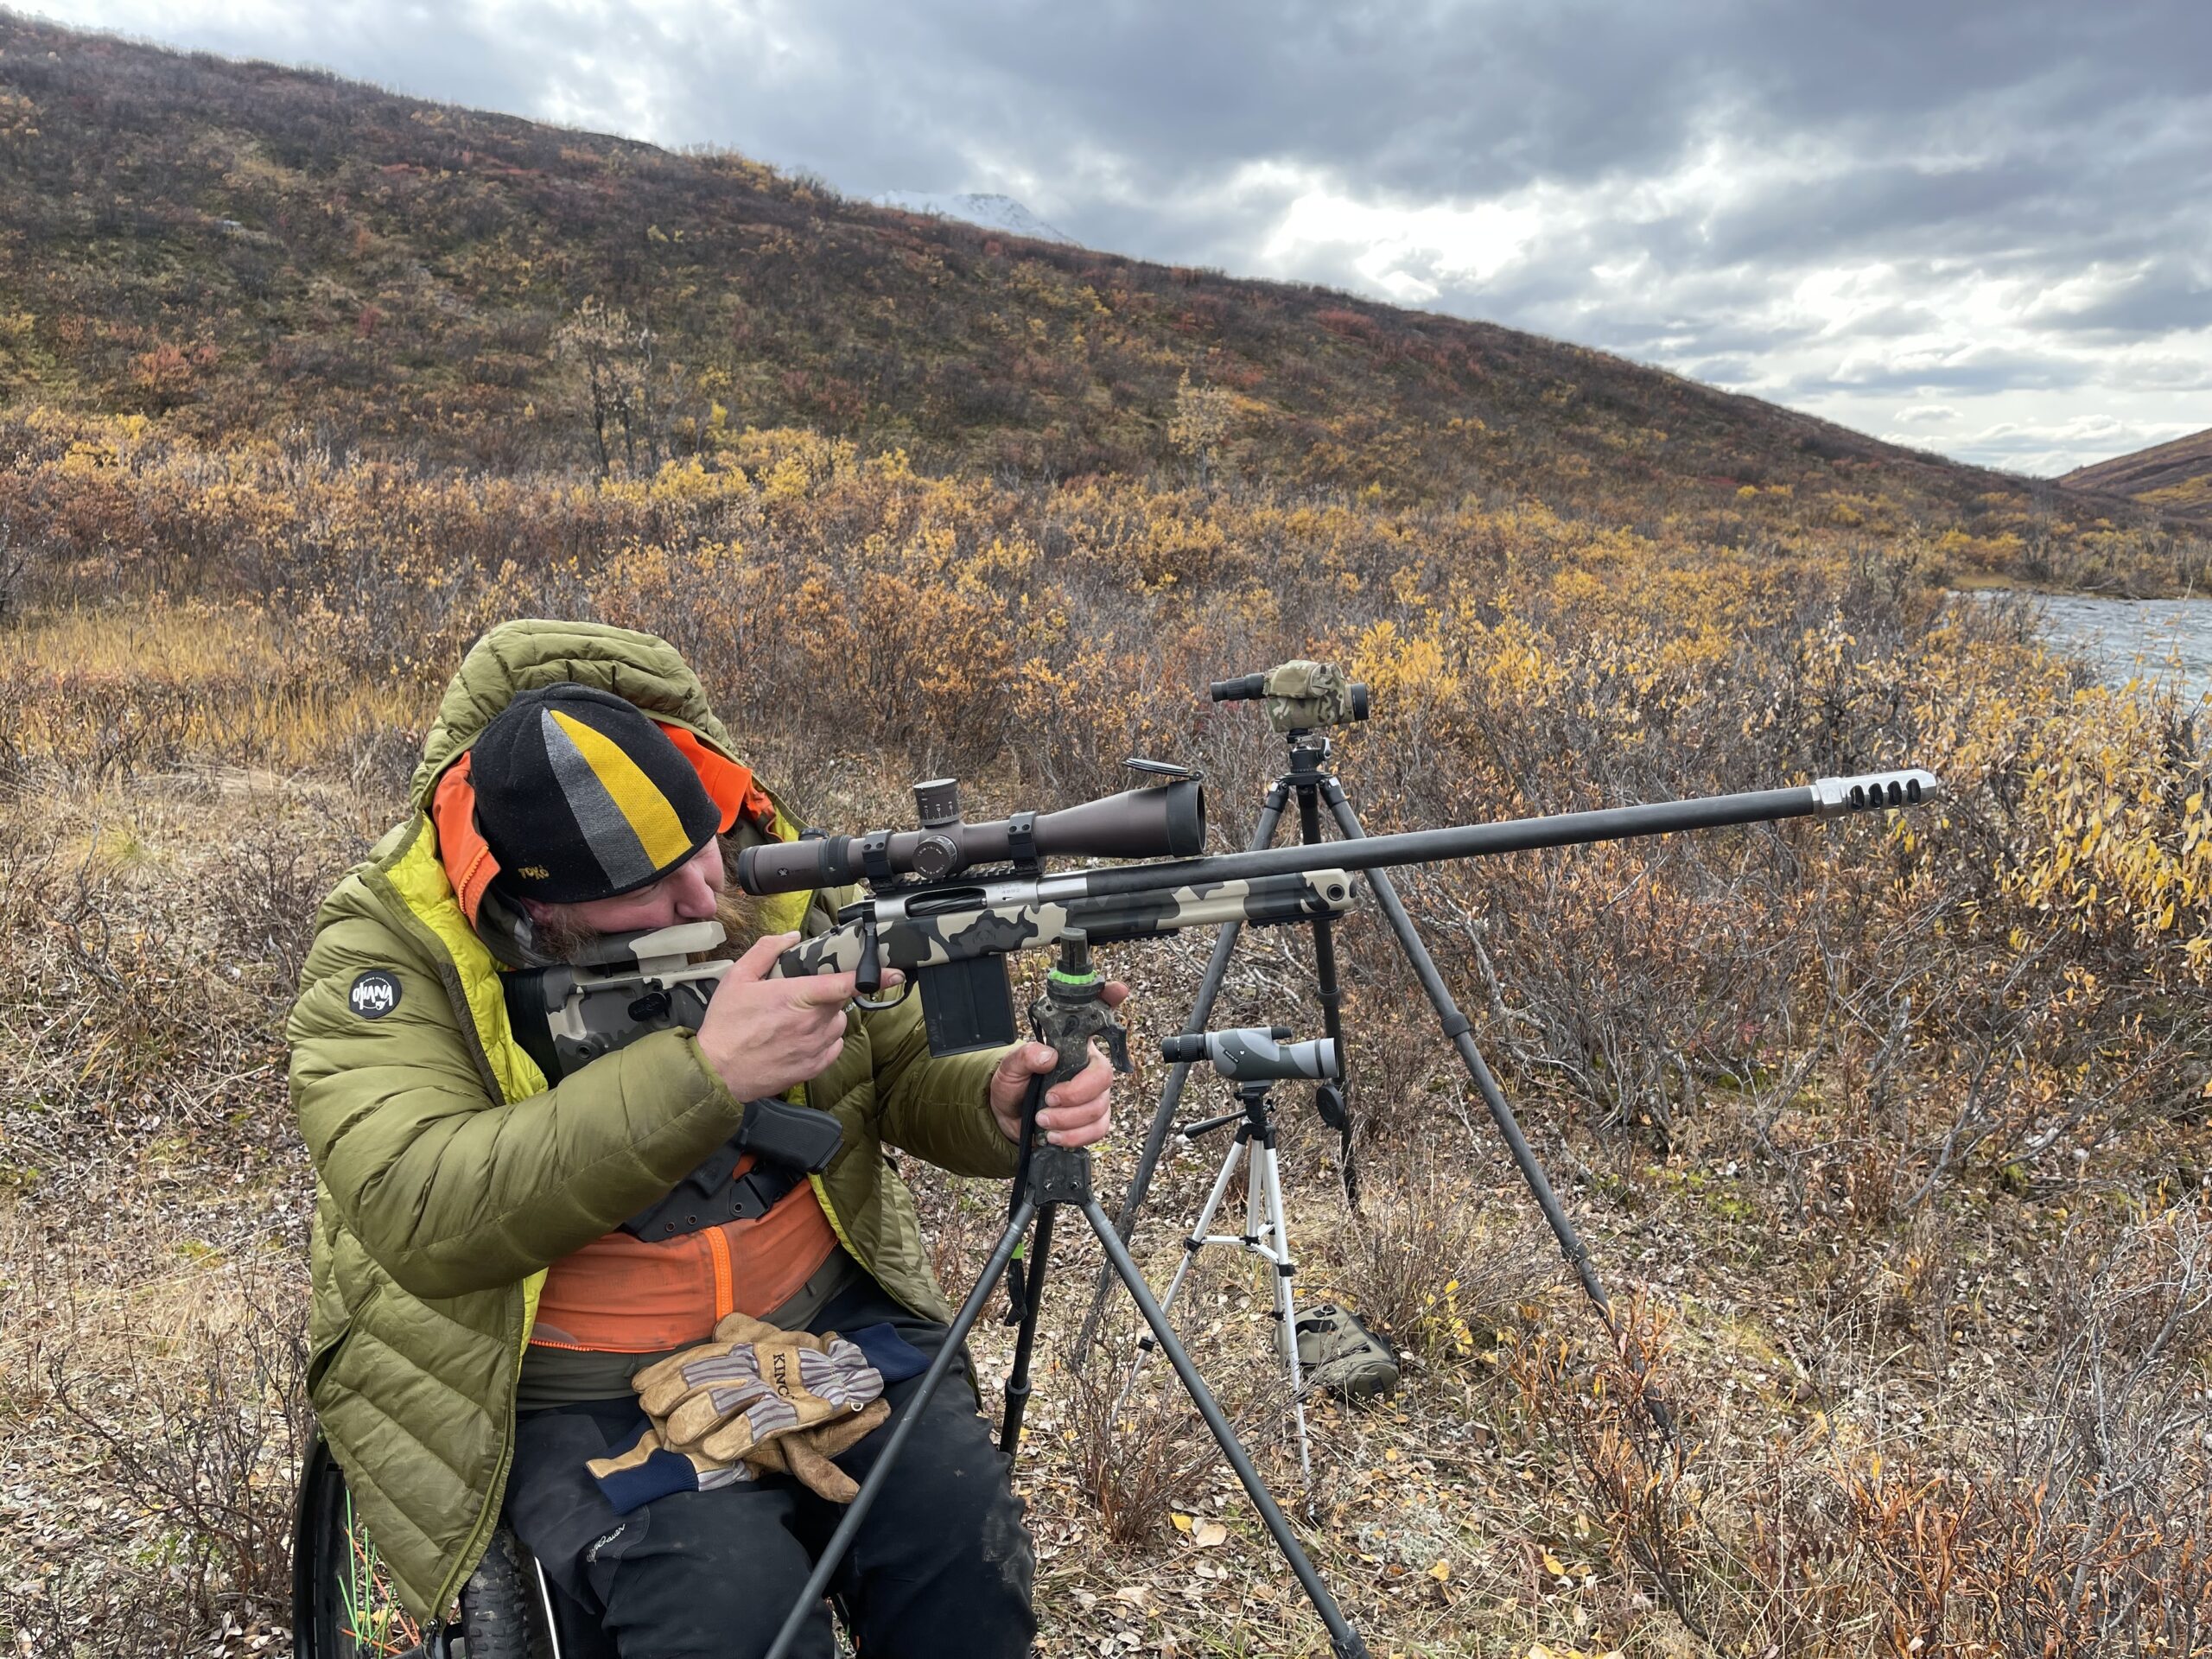 A seated man in a green puffy coat looks through the scope on a rifle, which is mounted on a tripod, with tundra shrubs in the background.